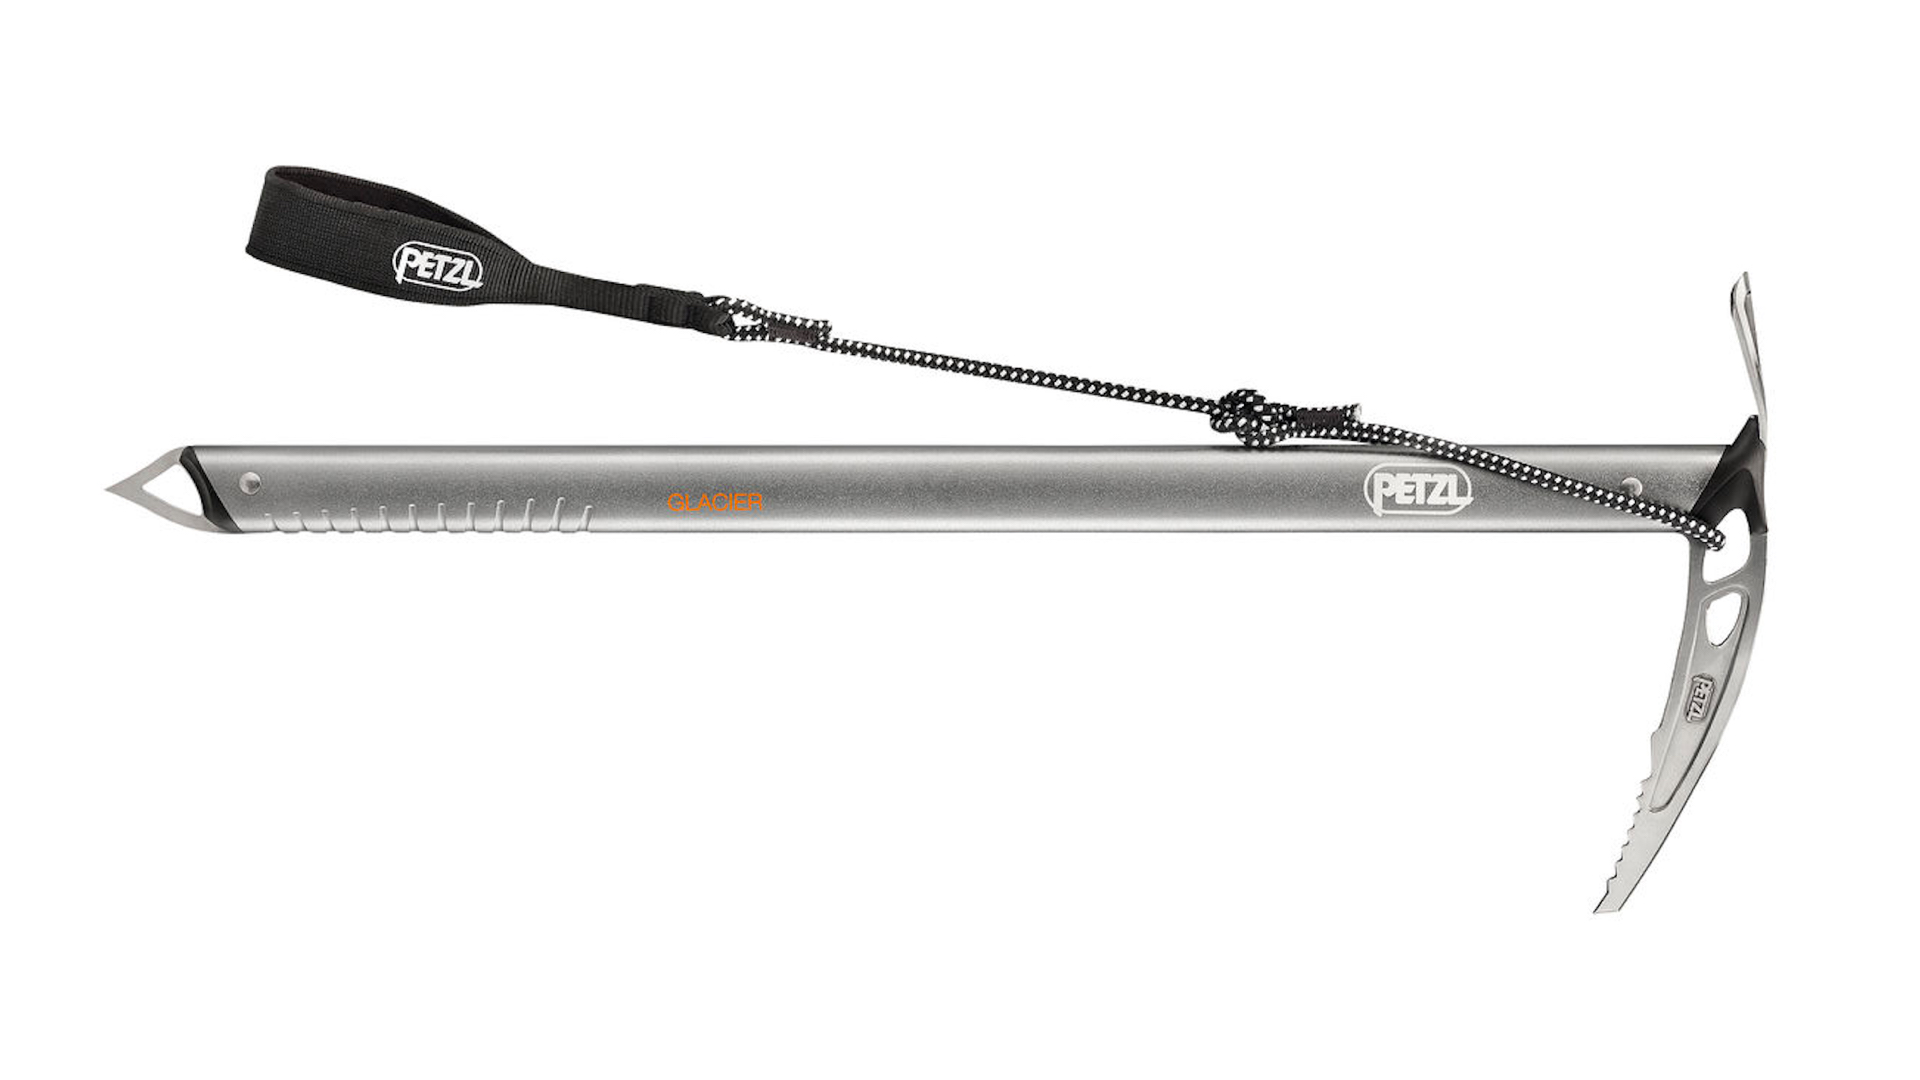 Details about   Petzl GLACIER Lightweight Performance Ice Axe for Glacier Travel Silver 75cm 